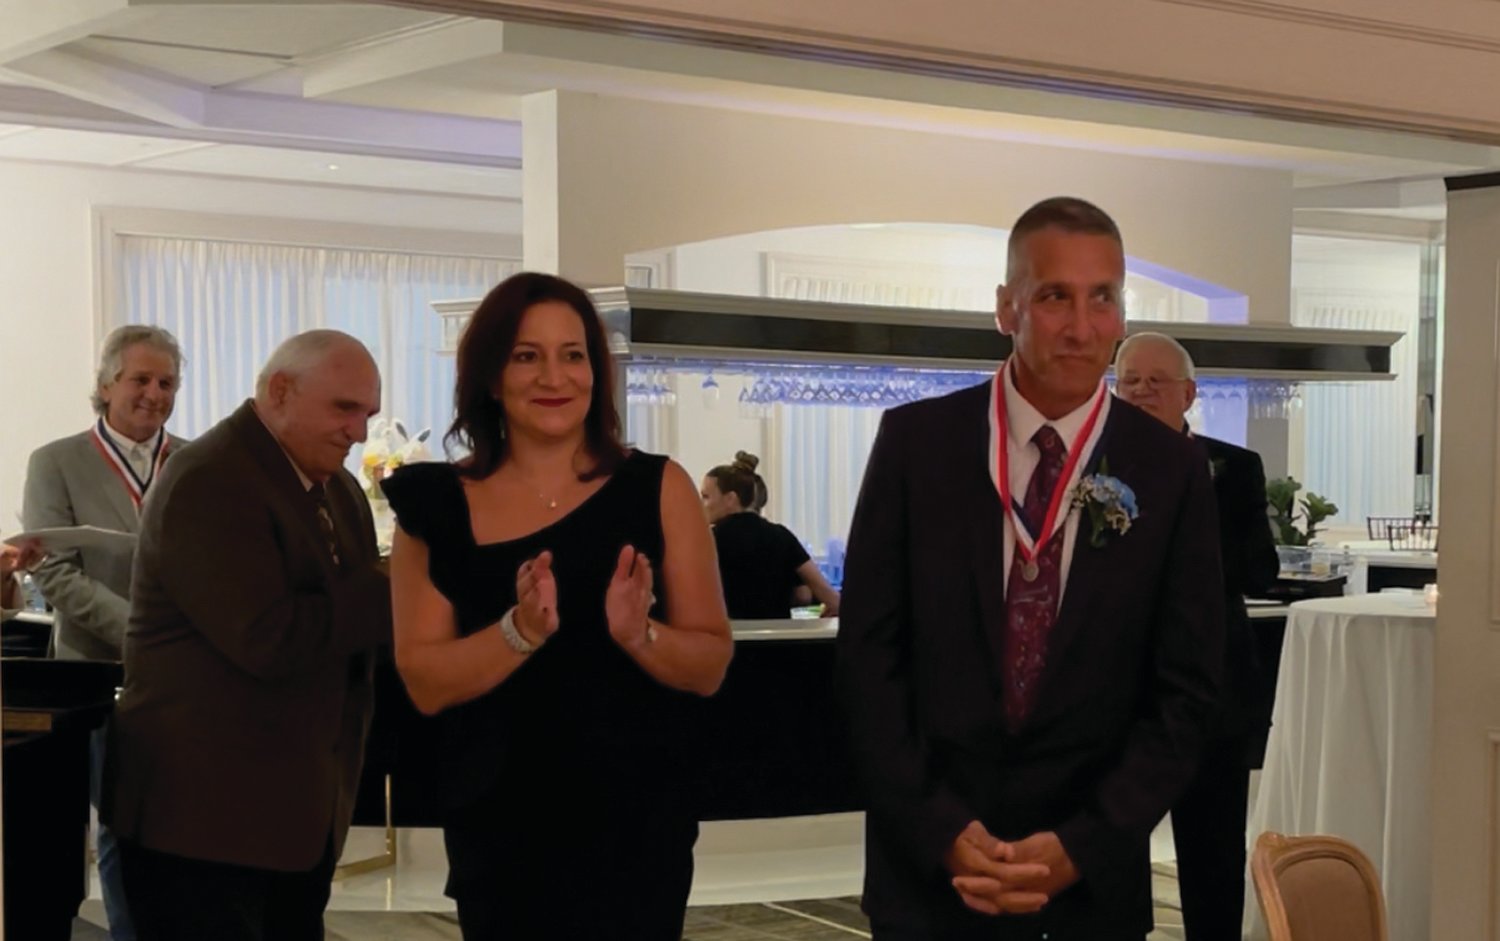 REASON TO SMILE: John Macera is escorted into last week’s Hall of Fame induction dinner by Superintendent Jeannine Nota-Masse. Looking on, from left, are Anthony Tomaselli, Ken Mancuso and William Stamp.